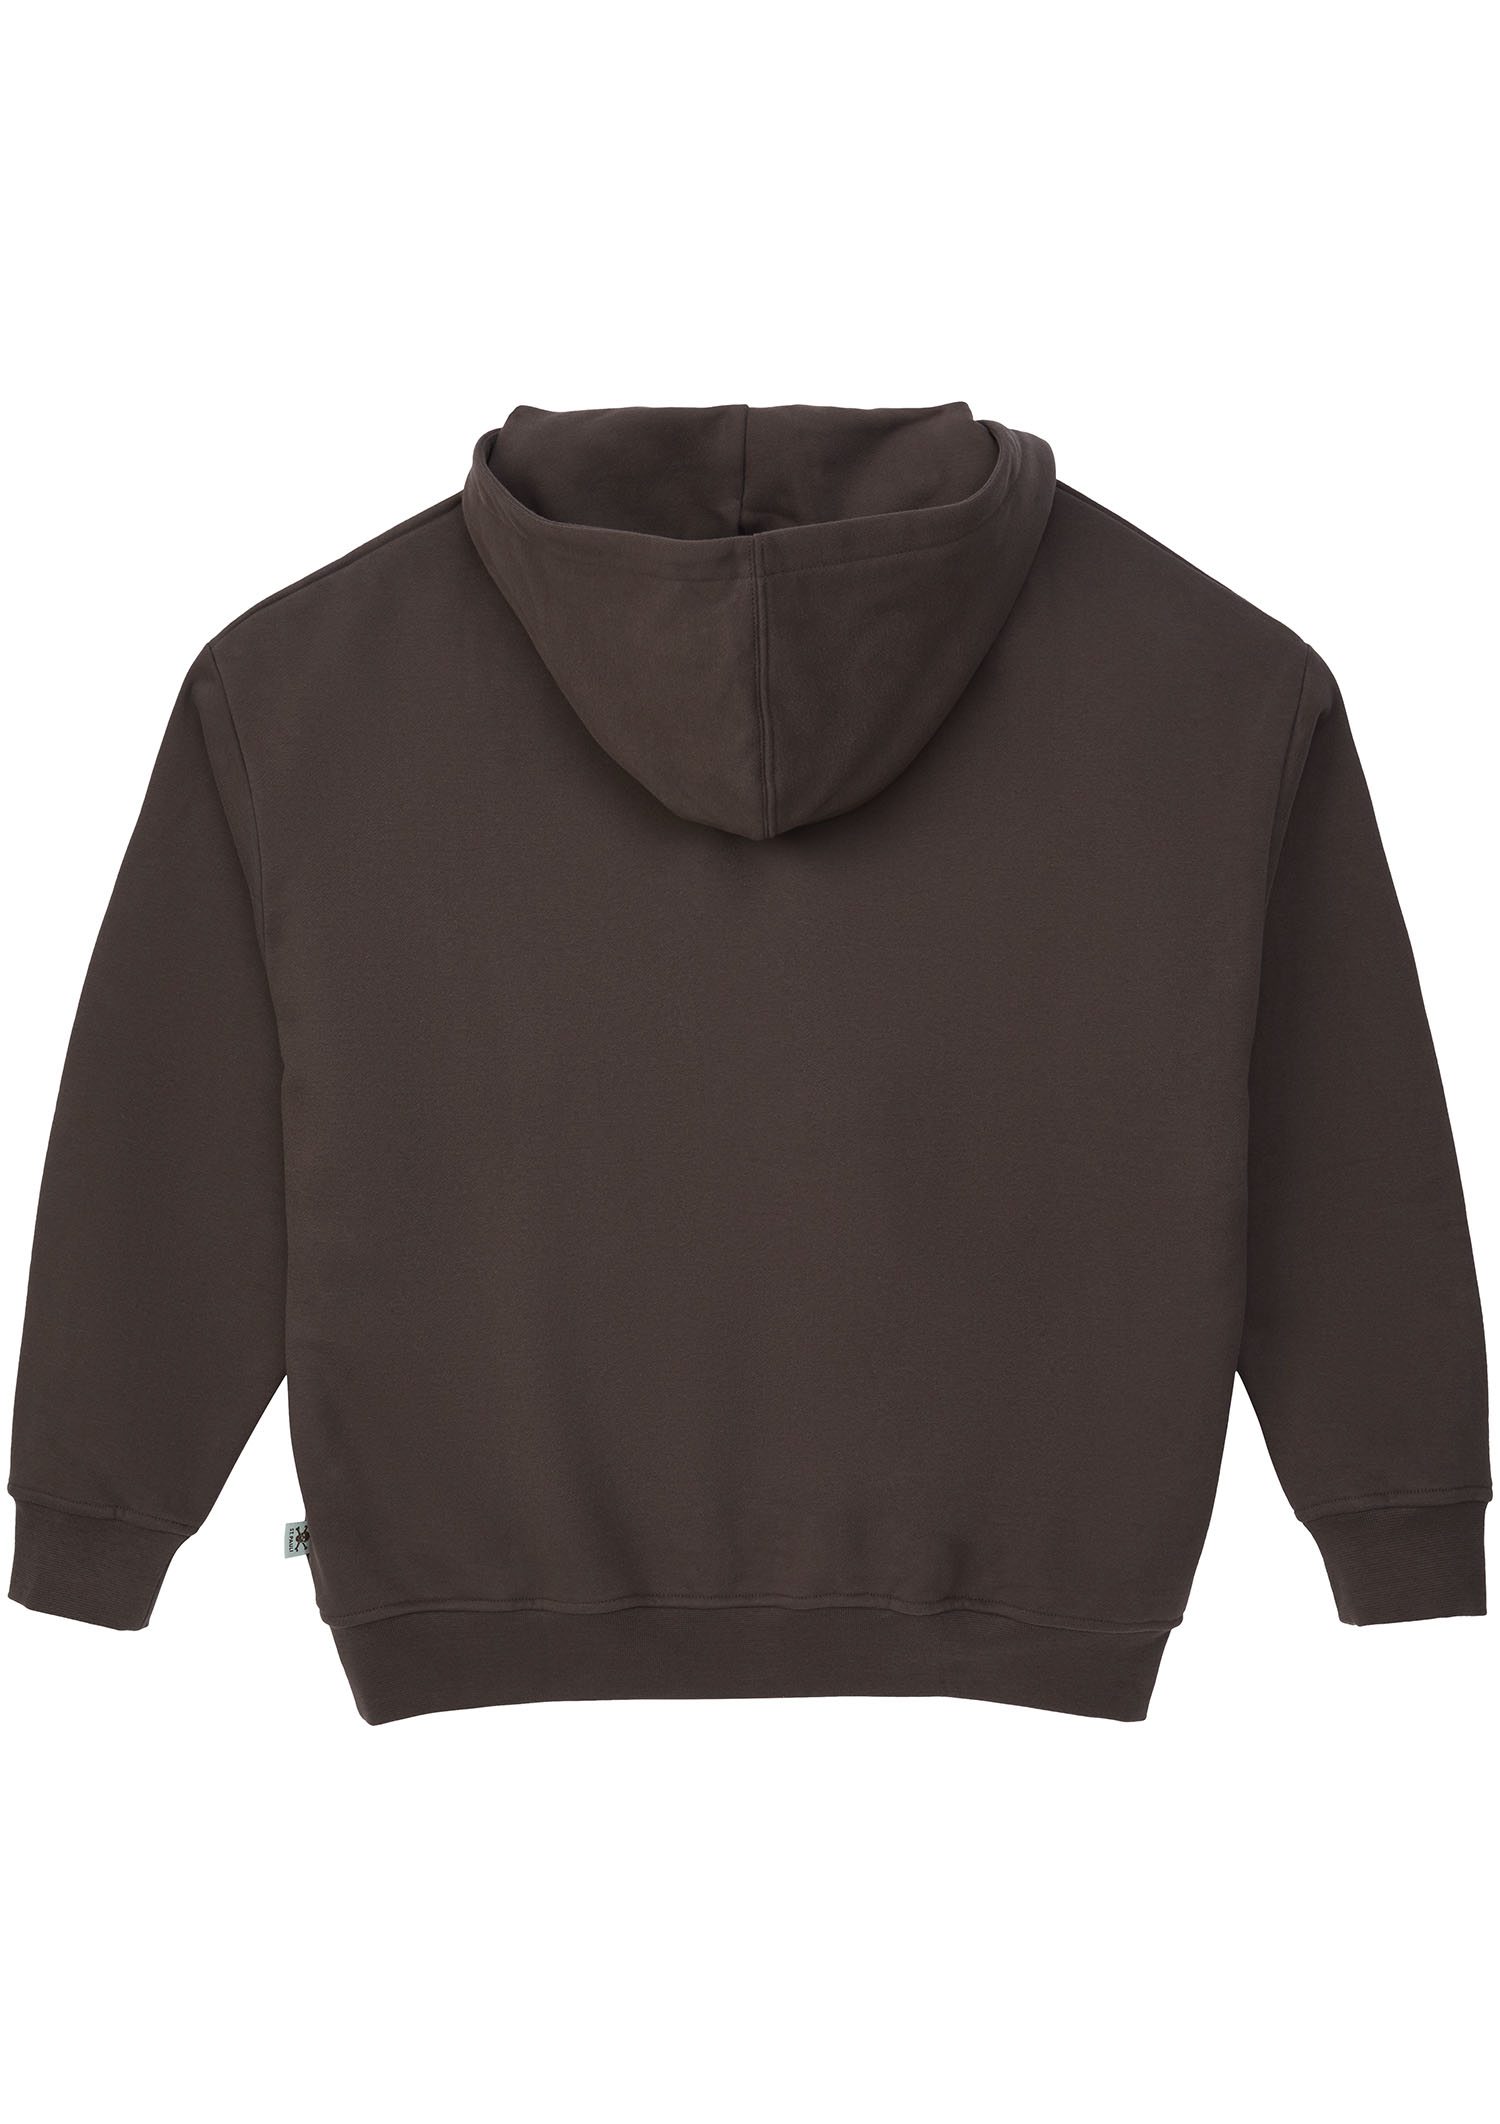 Hoodie "All Colours" - Chocolate Brown